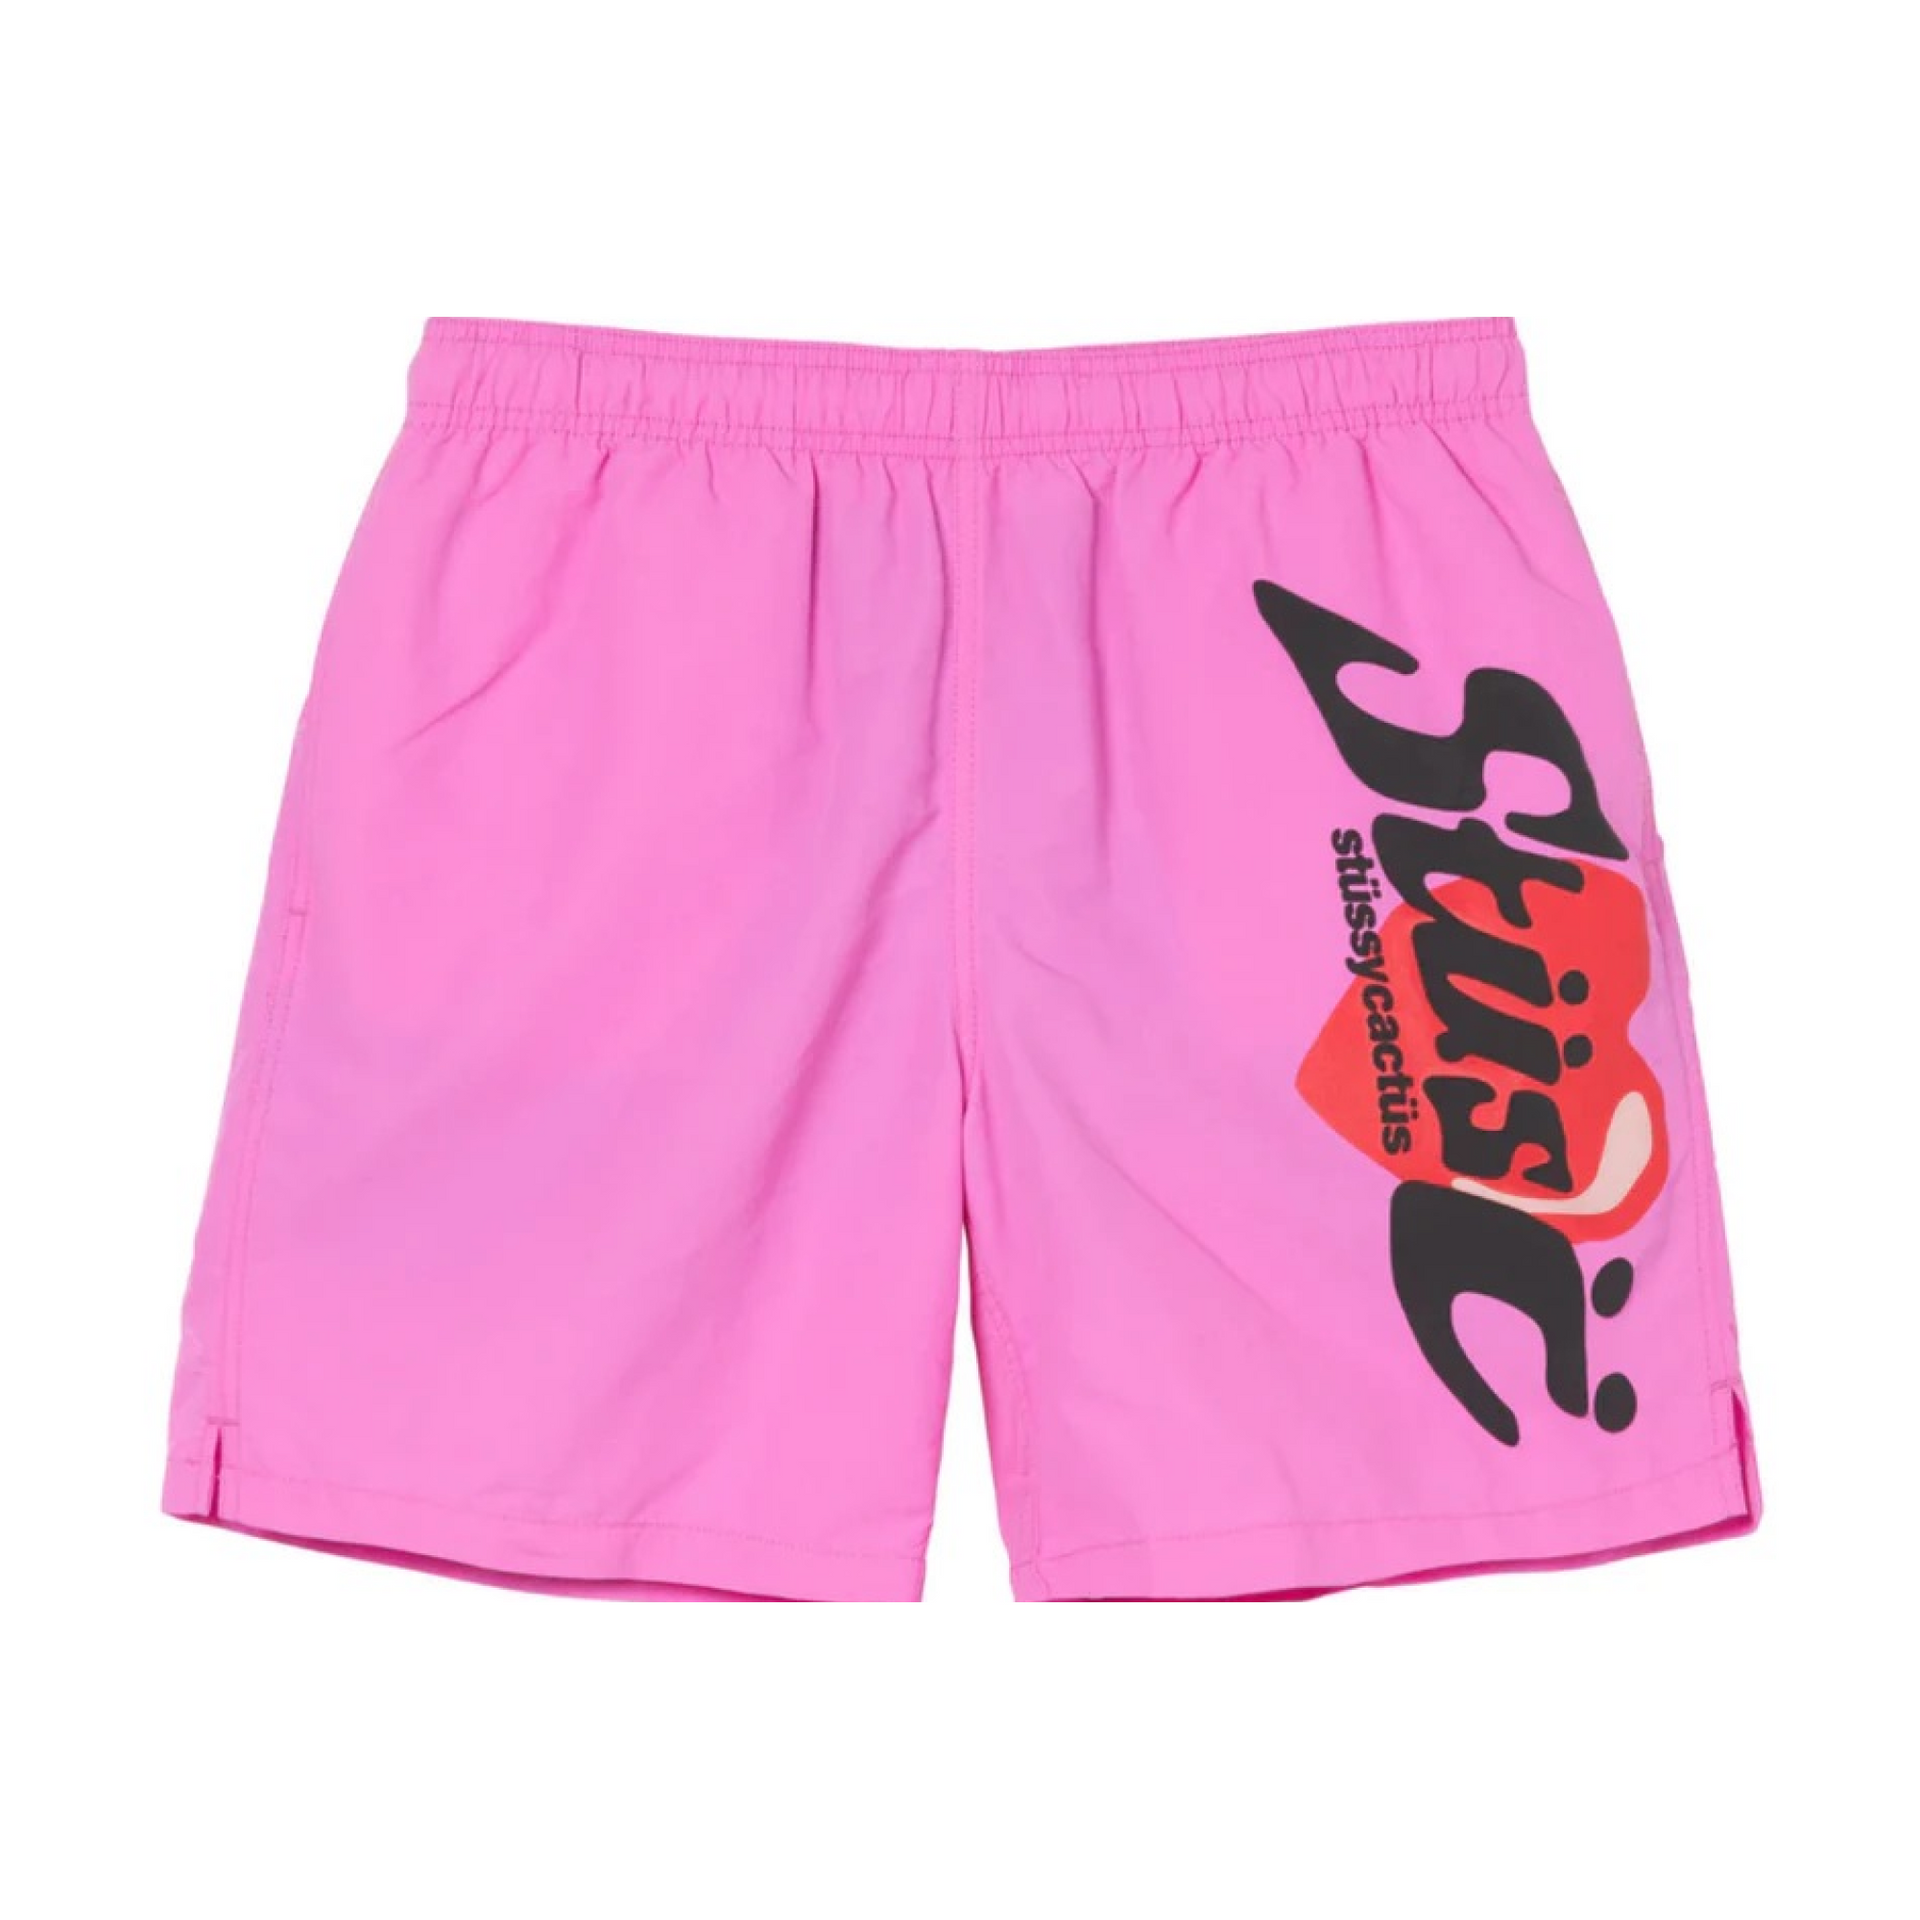 Stussy x CPFM Water Shorts Pink – CRUIZER